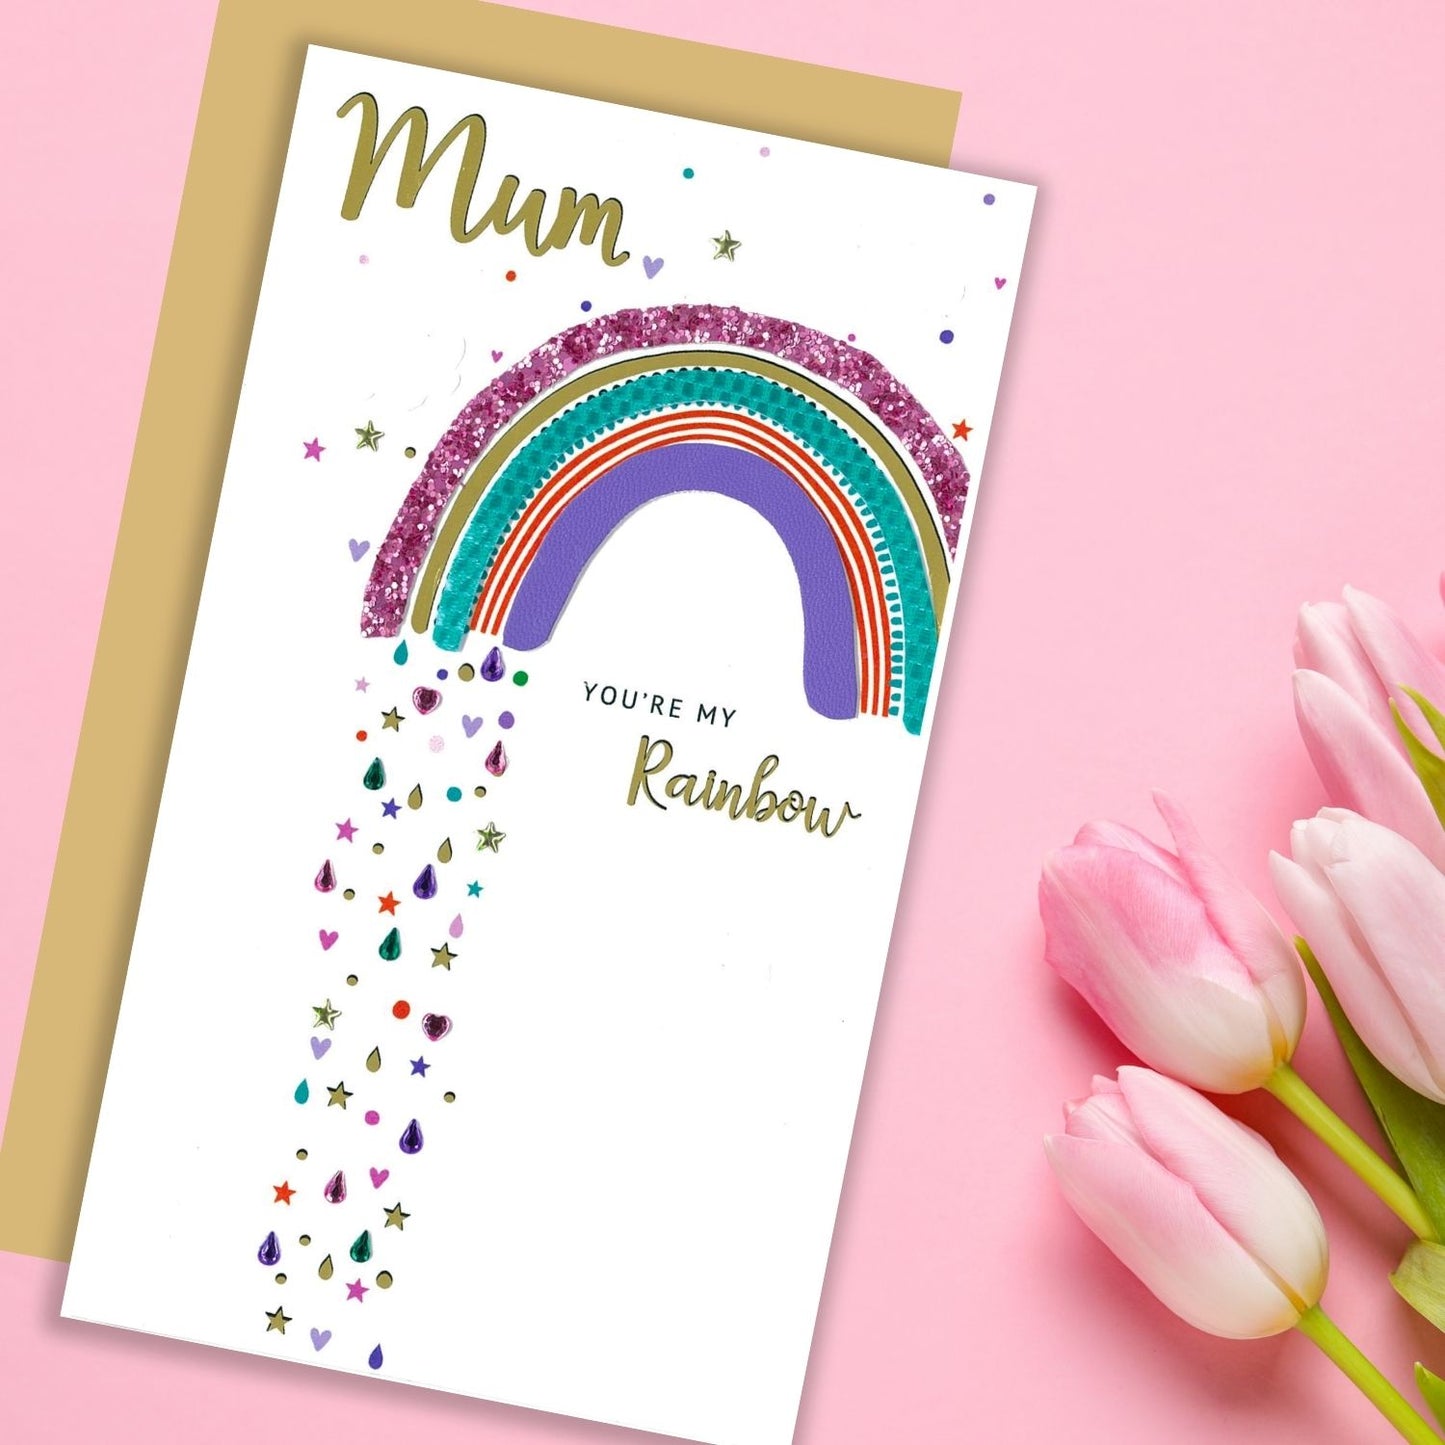 You're My Rainbow Mum, You Shine! Mother's Day Hand-Finished Greeting Card